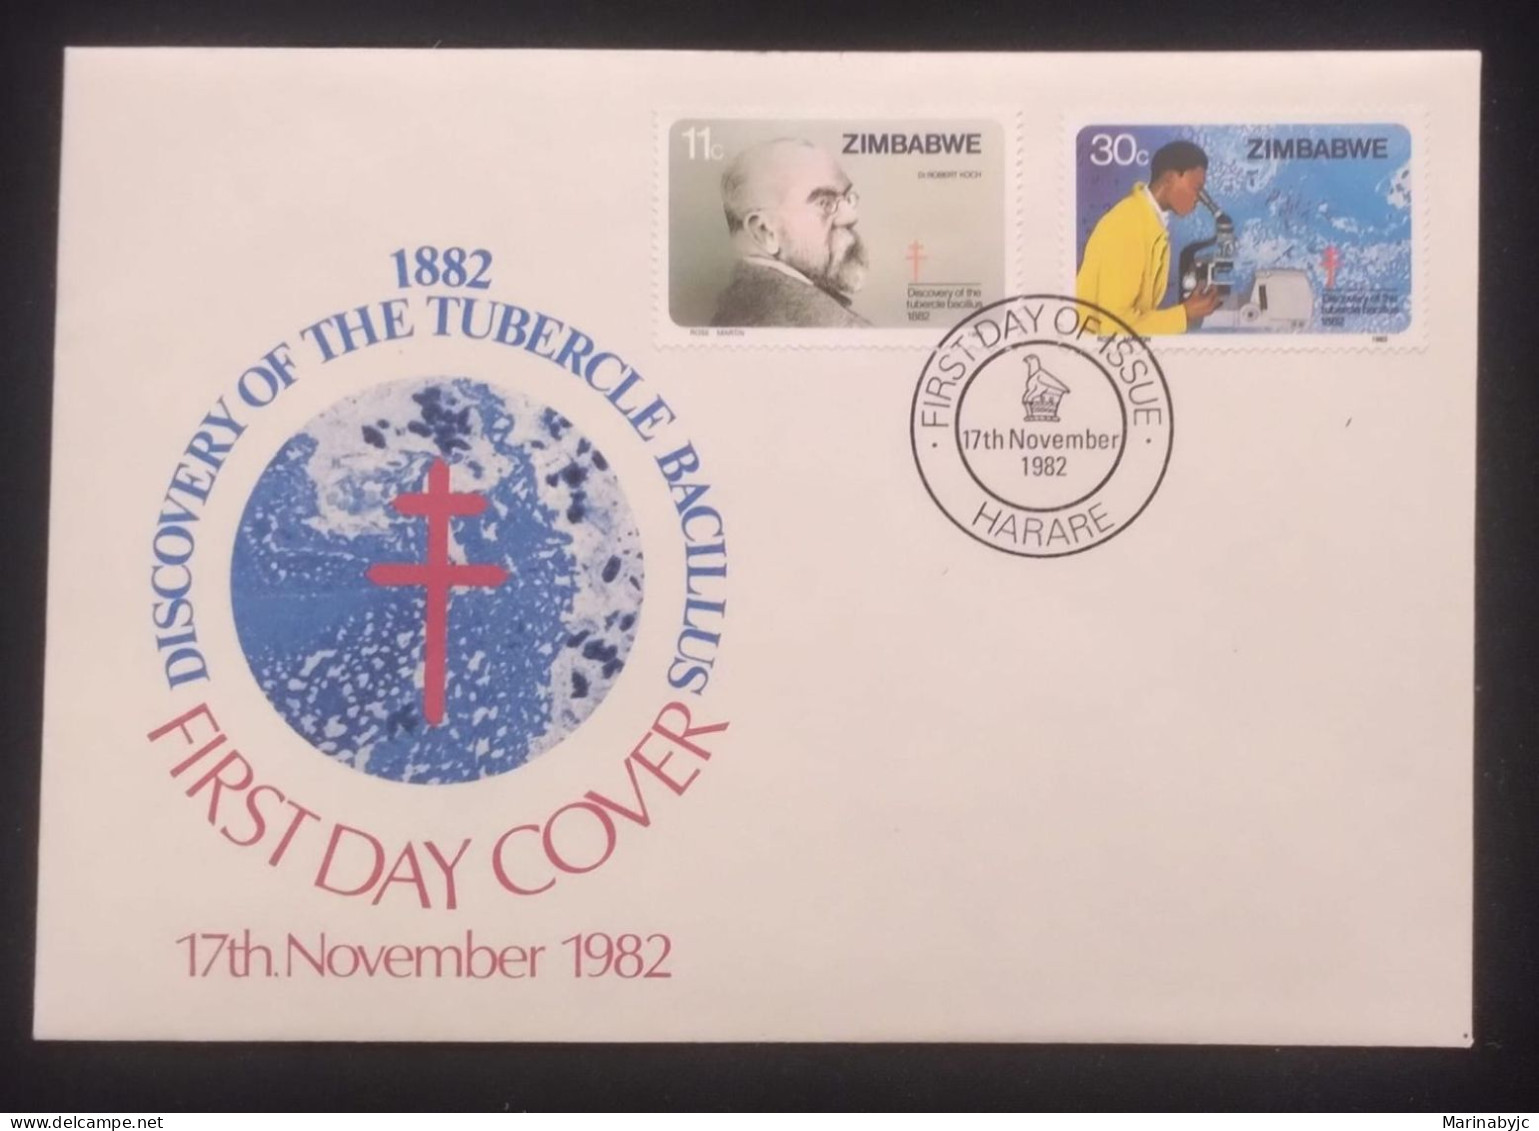 C) 1982. ZIMBABWE. FDC. DISCOVERY OF THE TUBERCLE BACILLUS. DOUBLE STAMP. XF - Unclassified